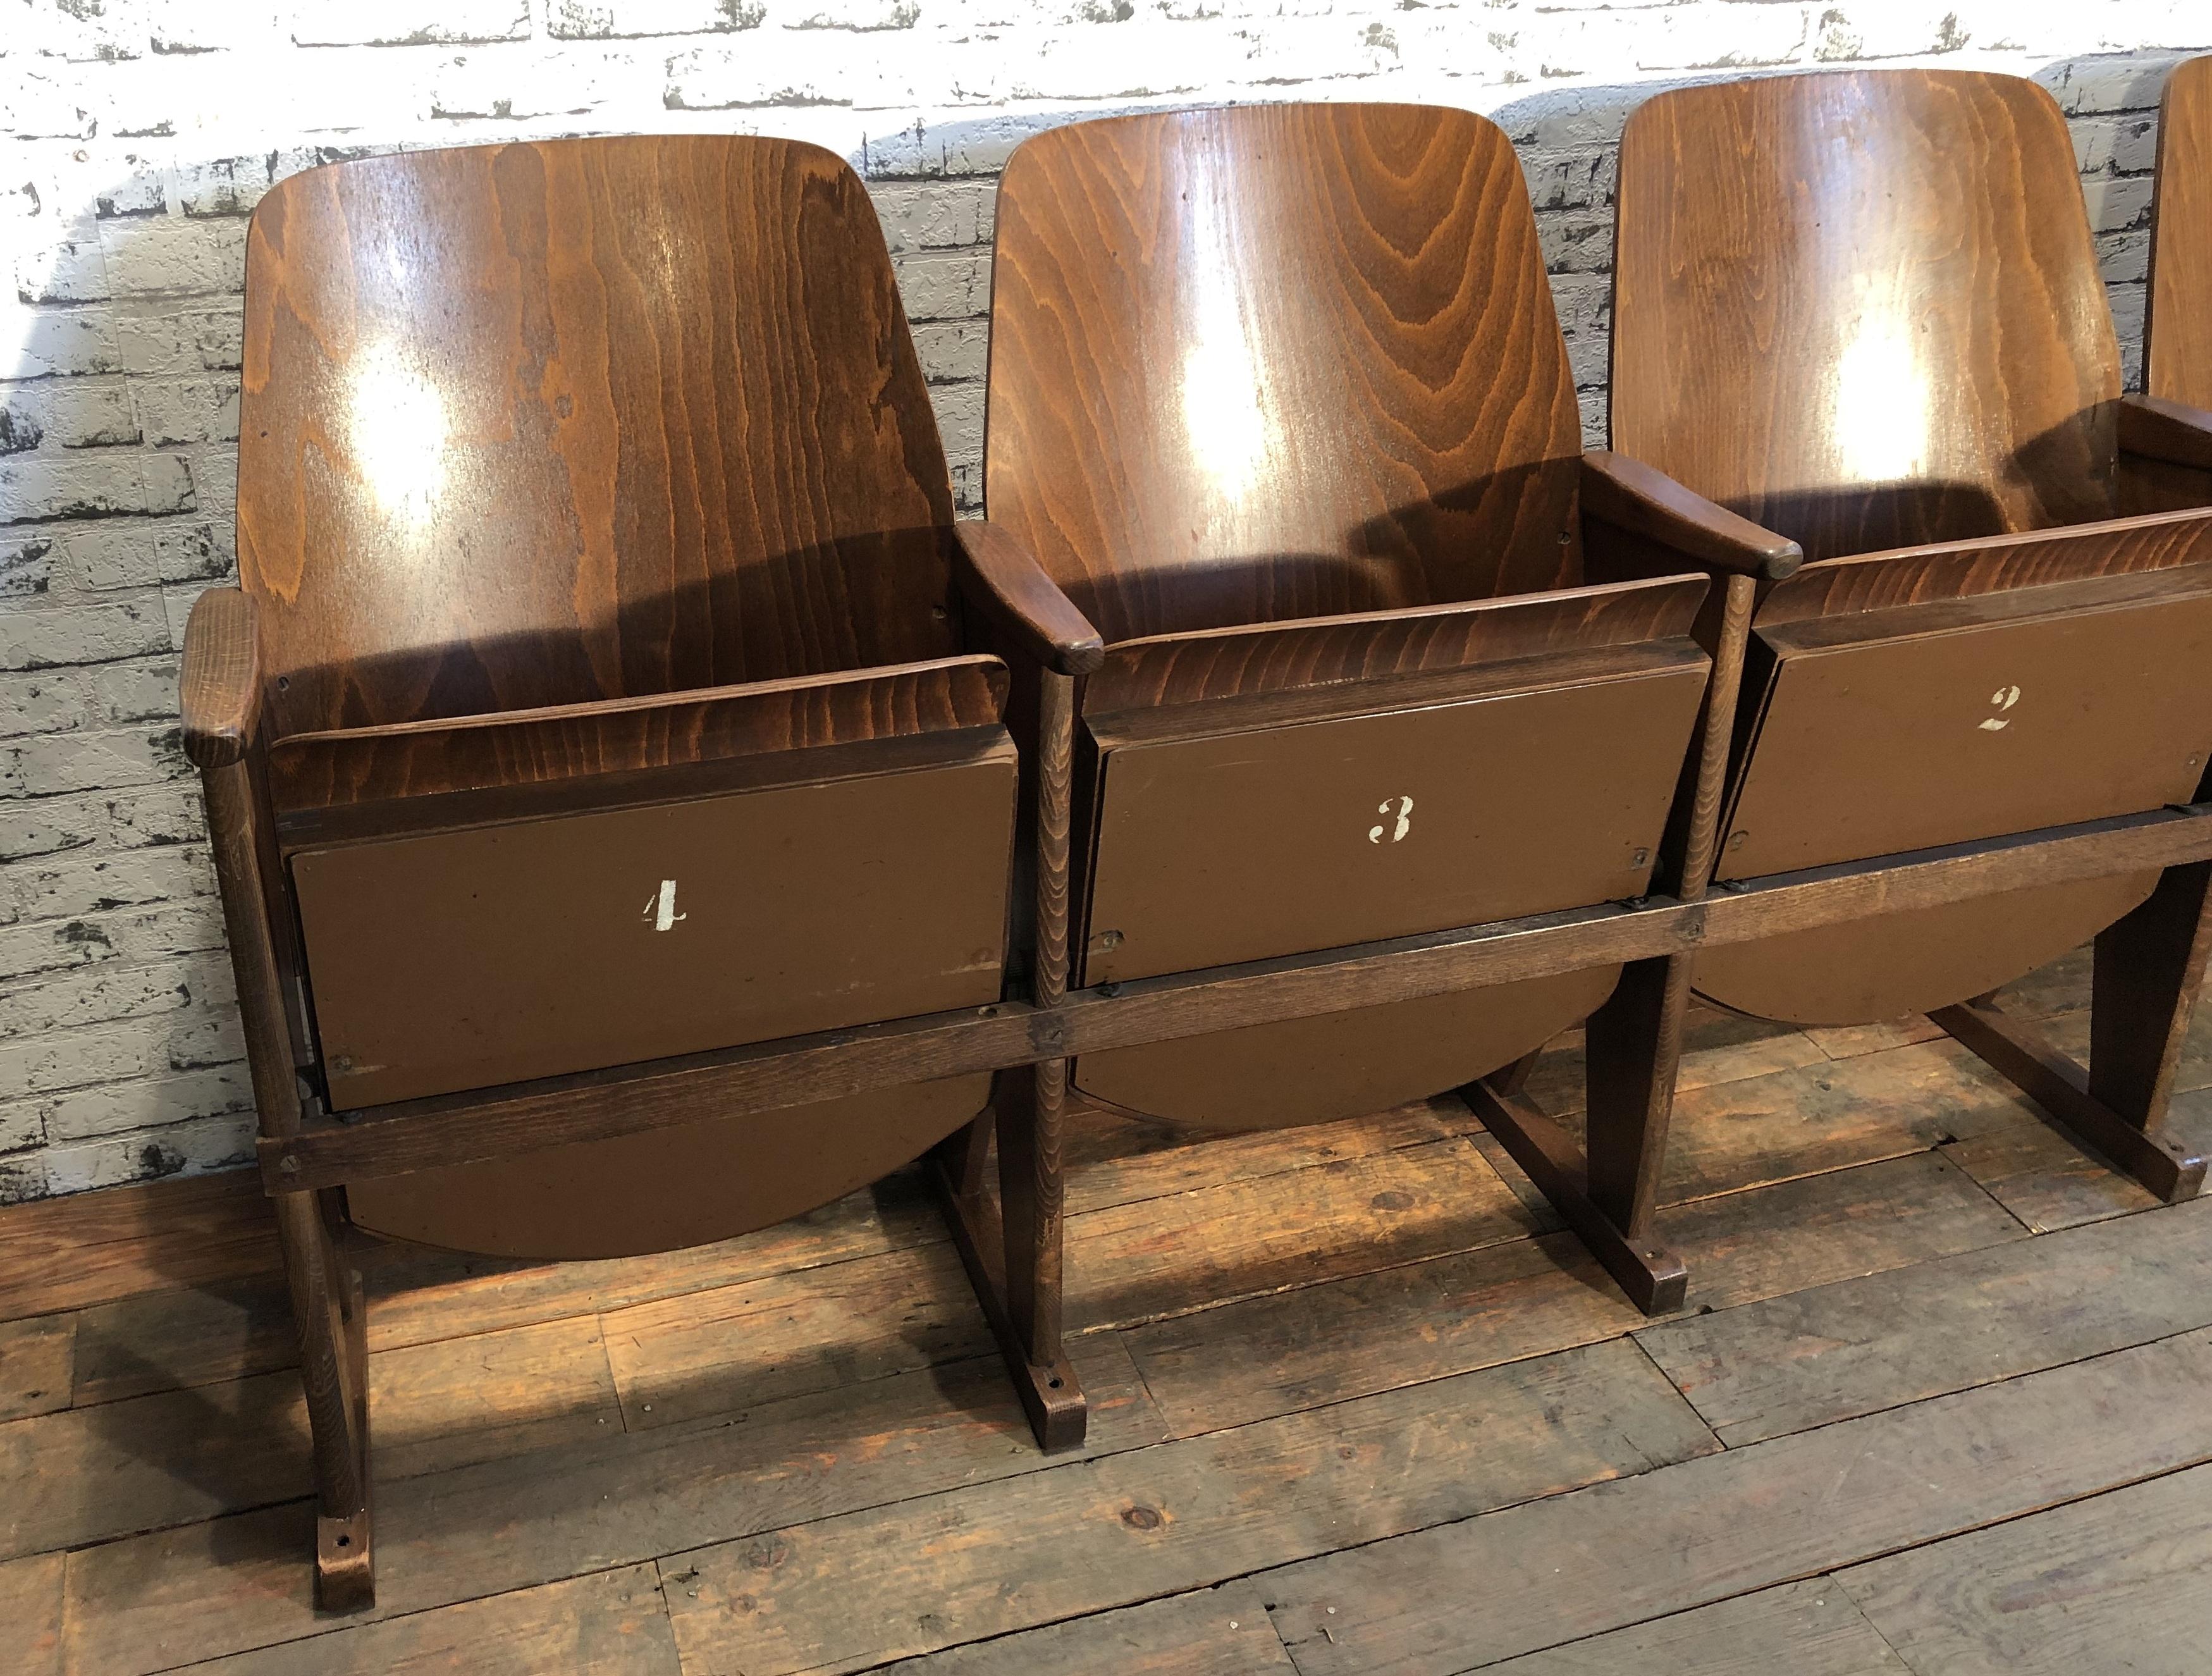 Czech Vintage Four-Seat Cinema Bench from Ton, 1960s